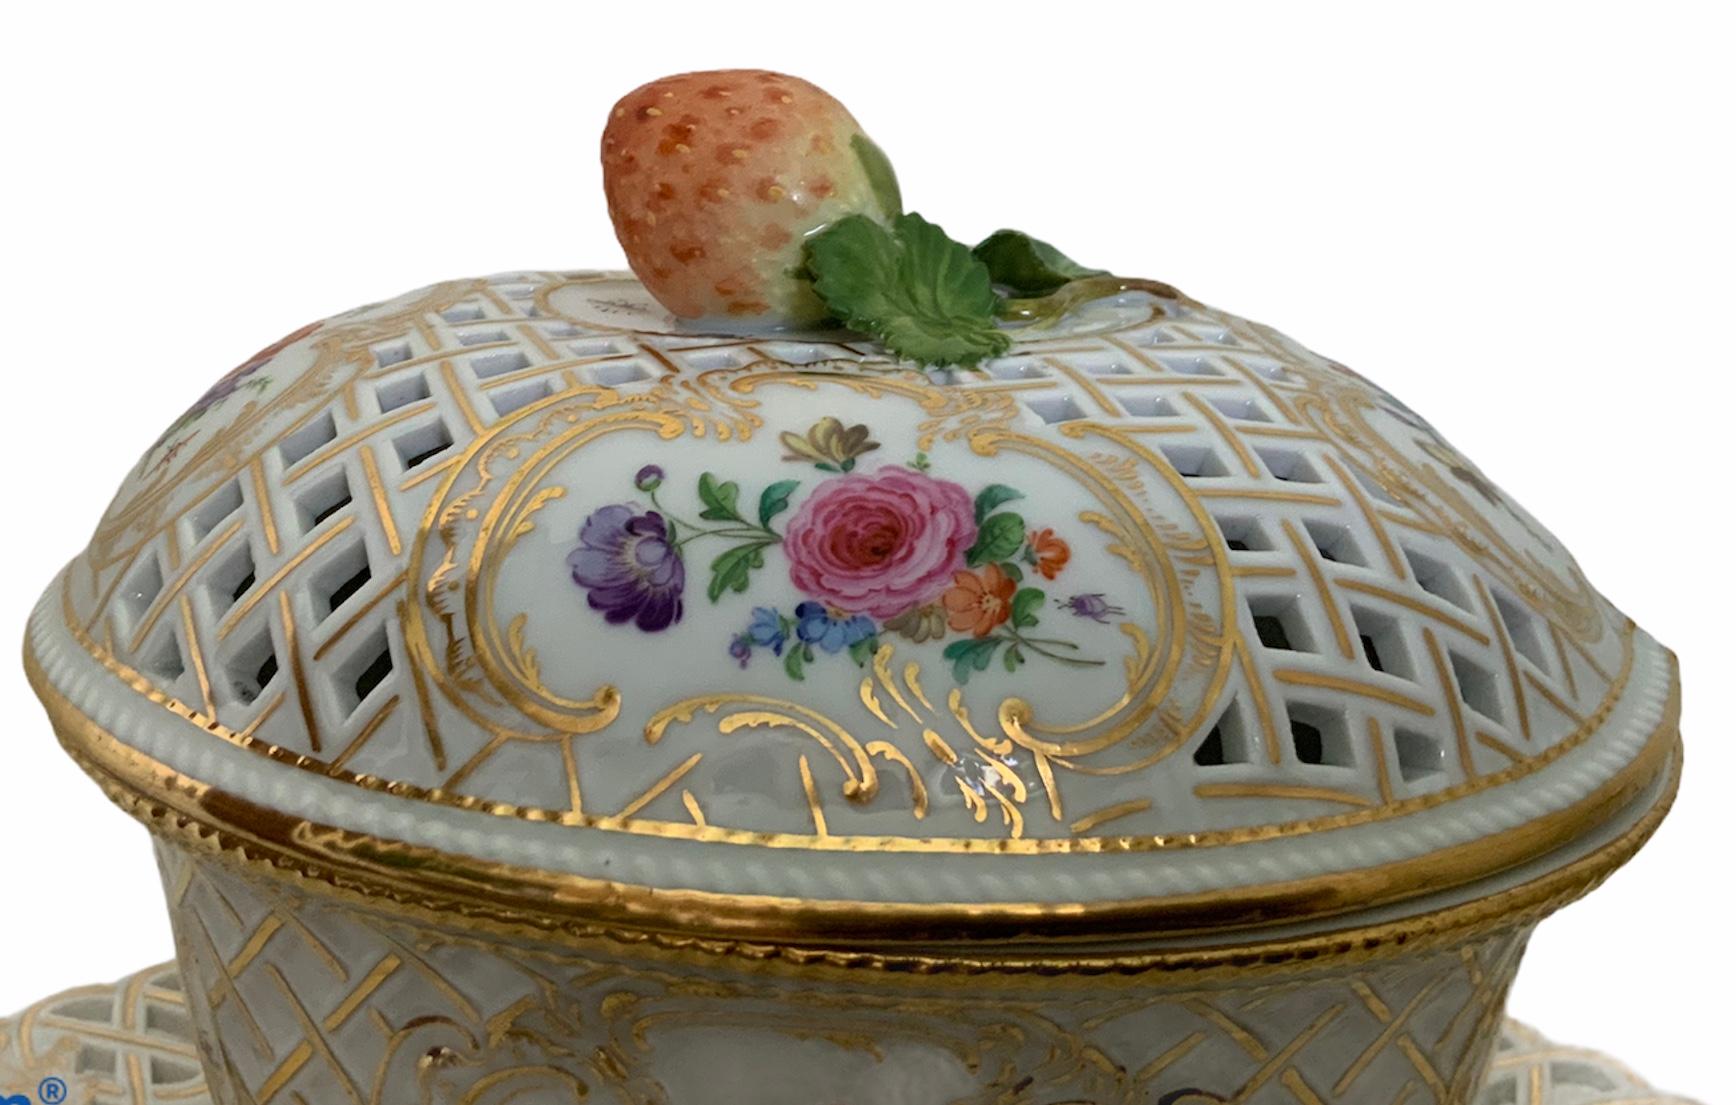 This a Meissen hand painted porcelain gravy/sauce oval tureen with attached diamond shaped plate. The lid has reticulated gilt braided pattern and adorned with four gilt rocaille scrolled border cartouches that have different flowers in the center.